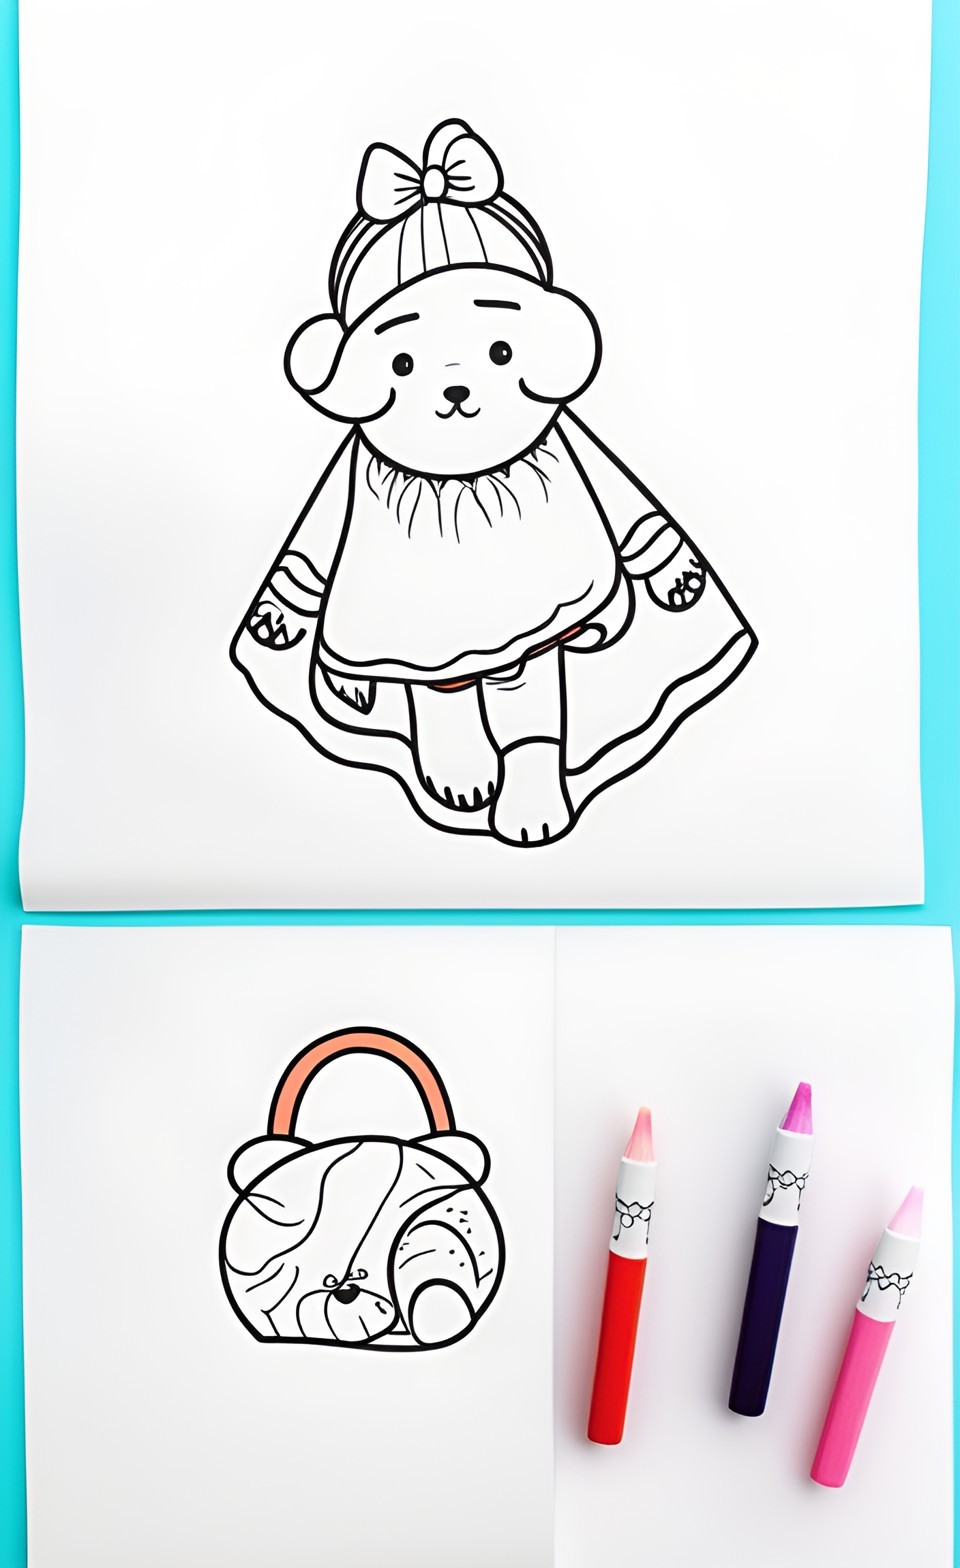 Cute Drawing İdeas| Easy Drawing For Kids Step by Step #3